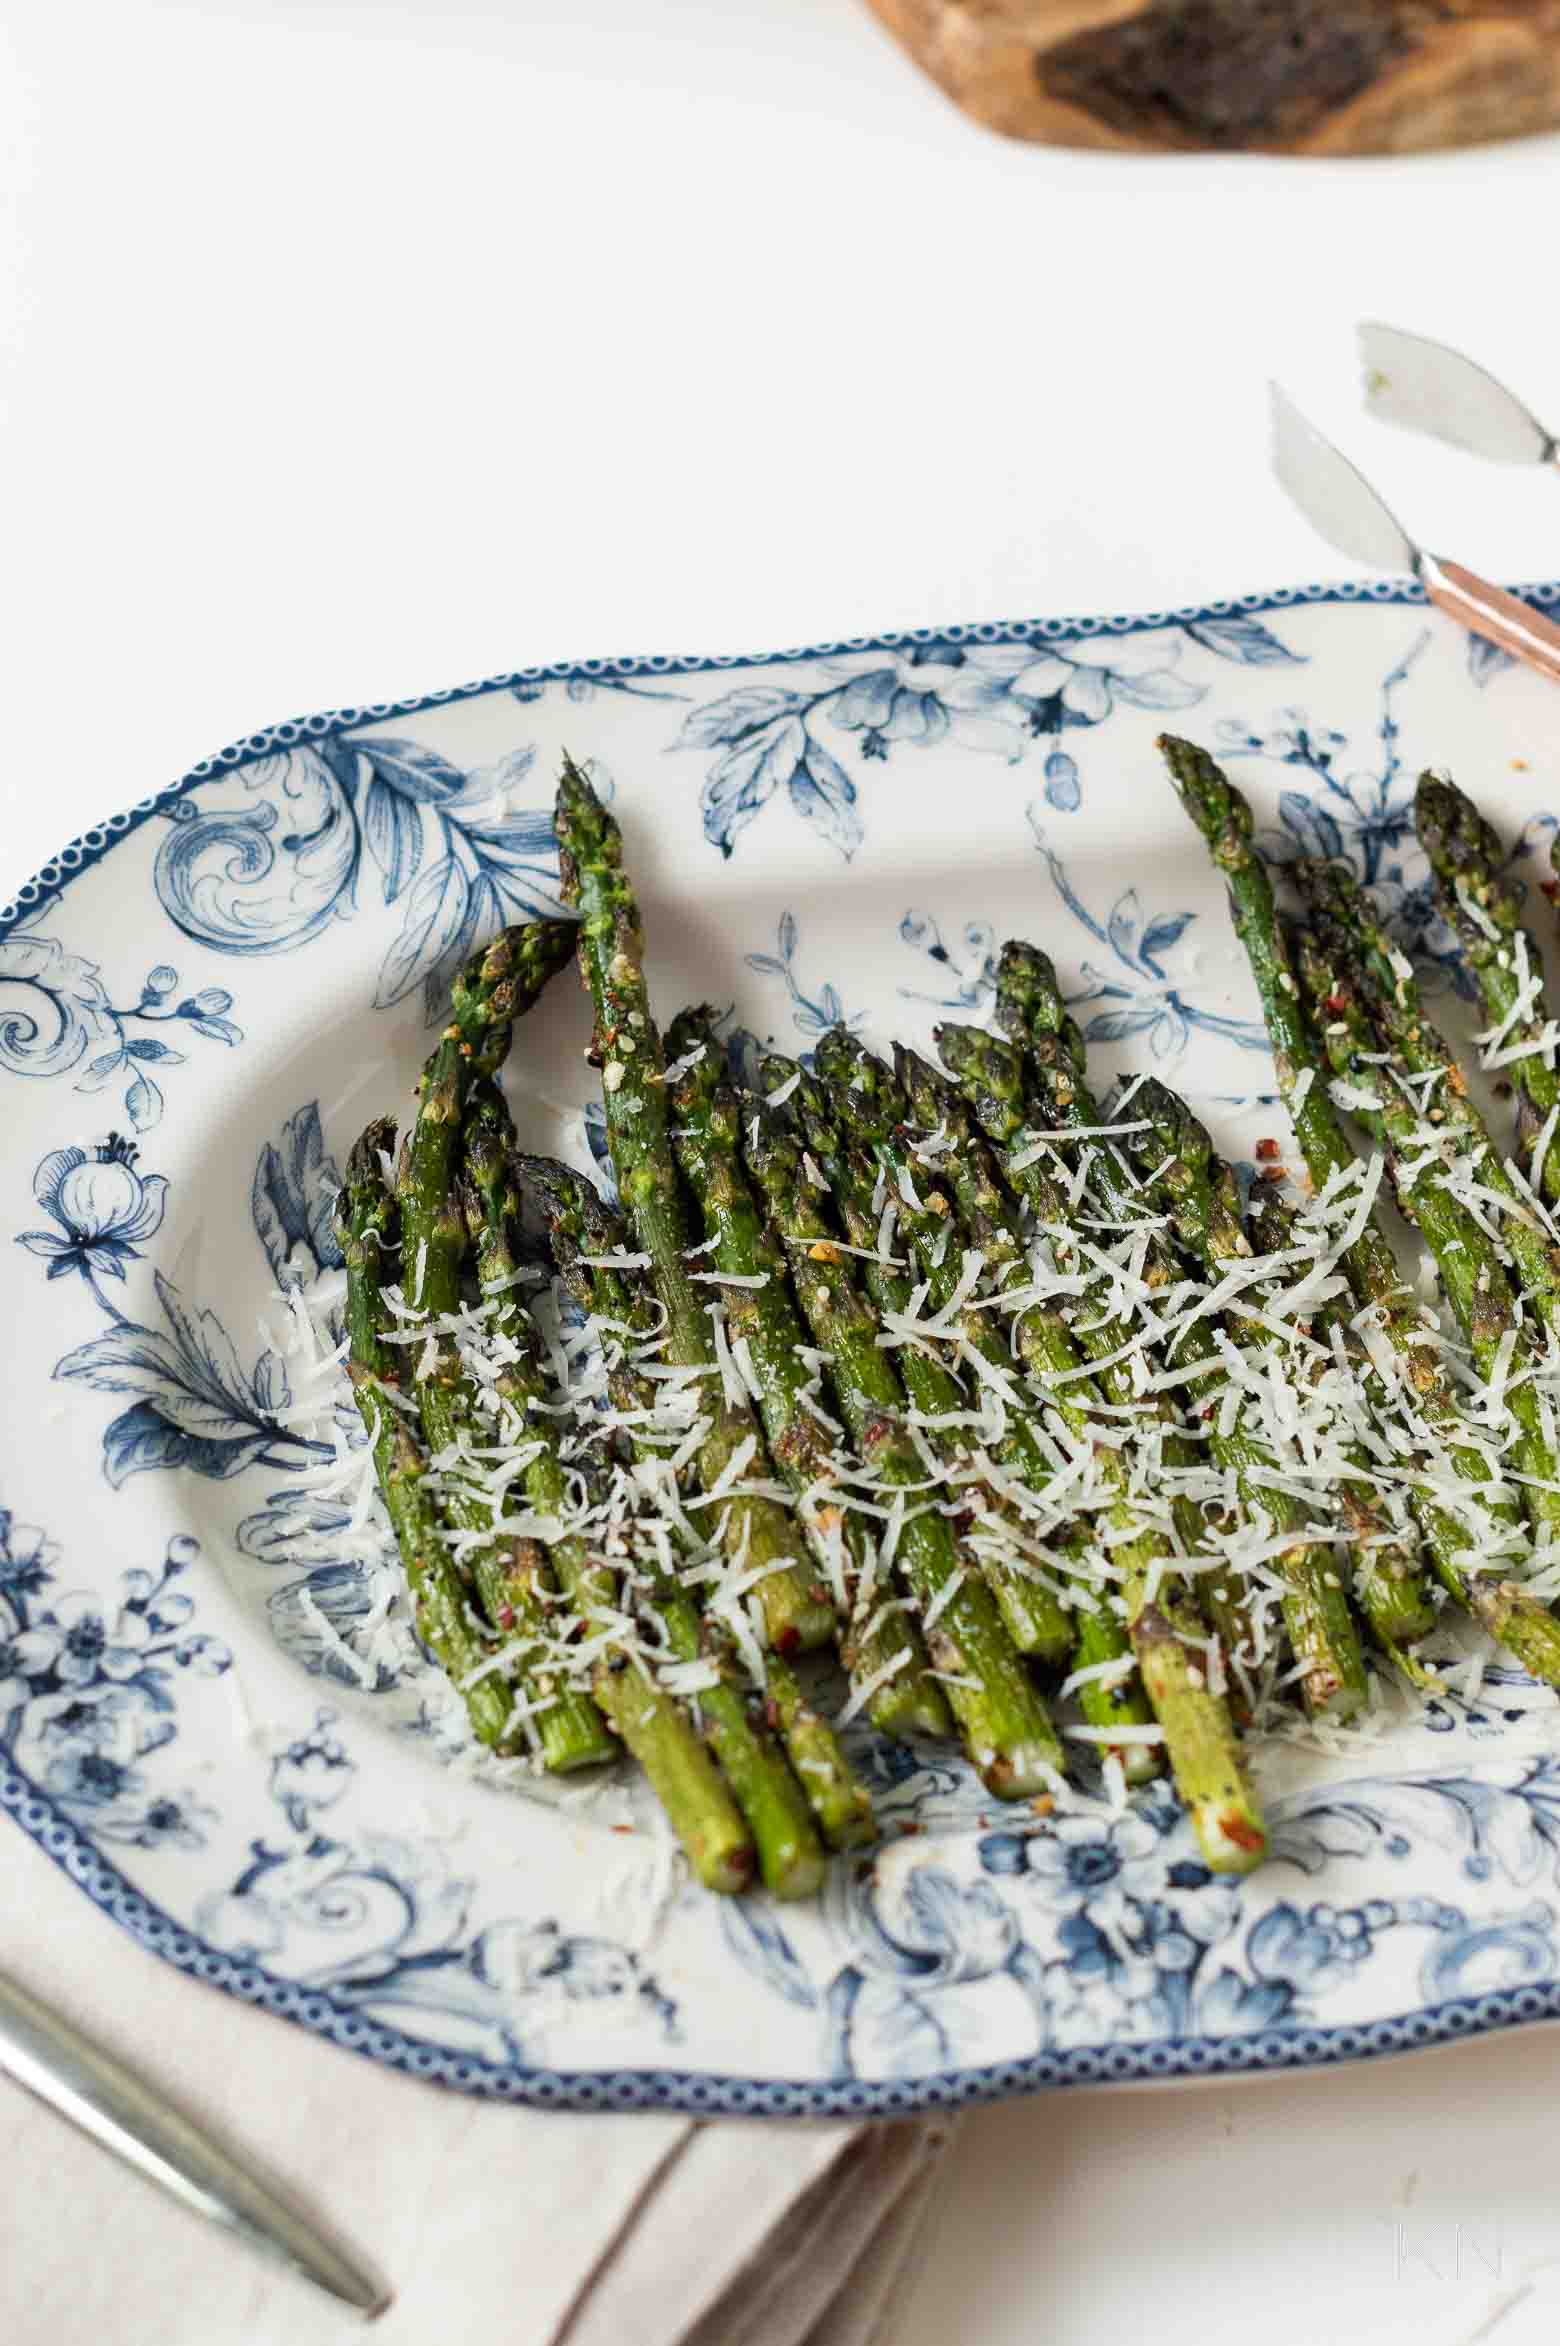 Simple Roasted Veggie Side Idea- Asparagus with Parmesan Cheese